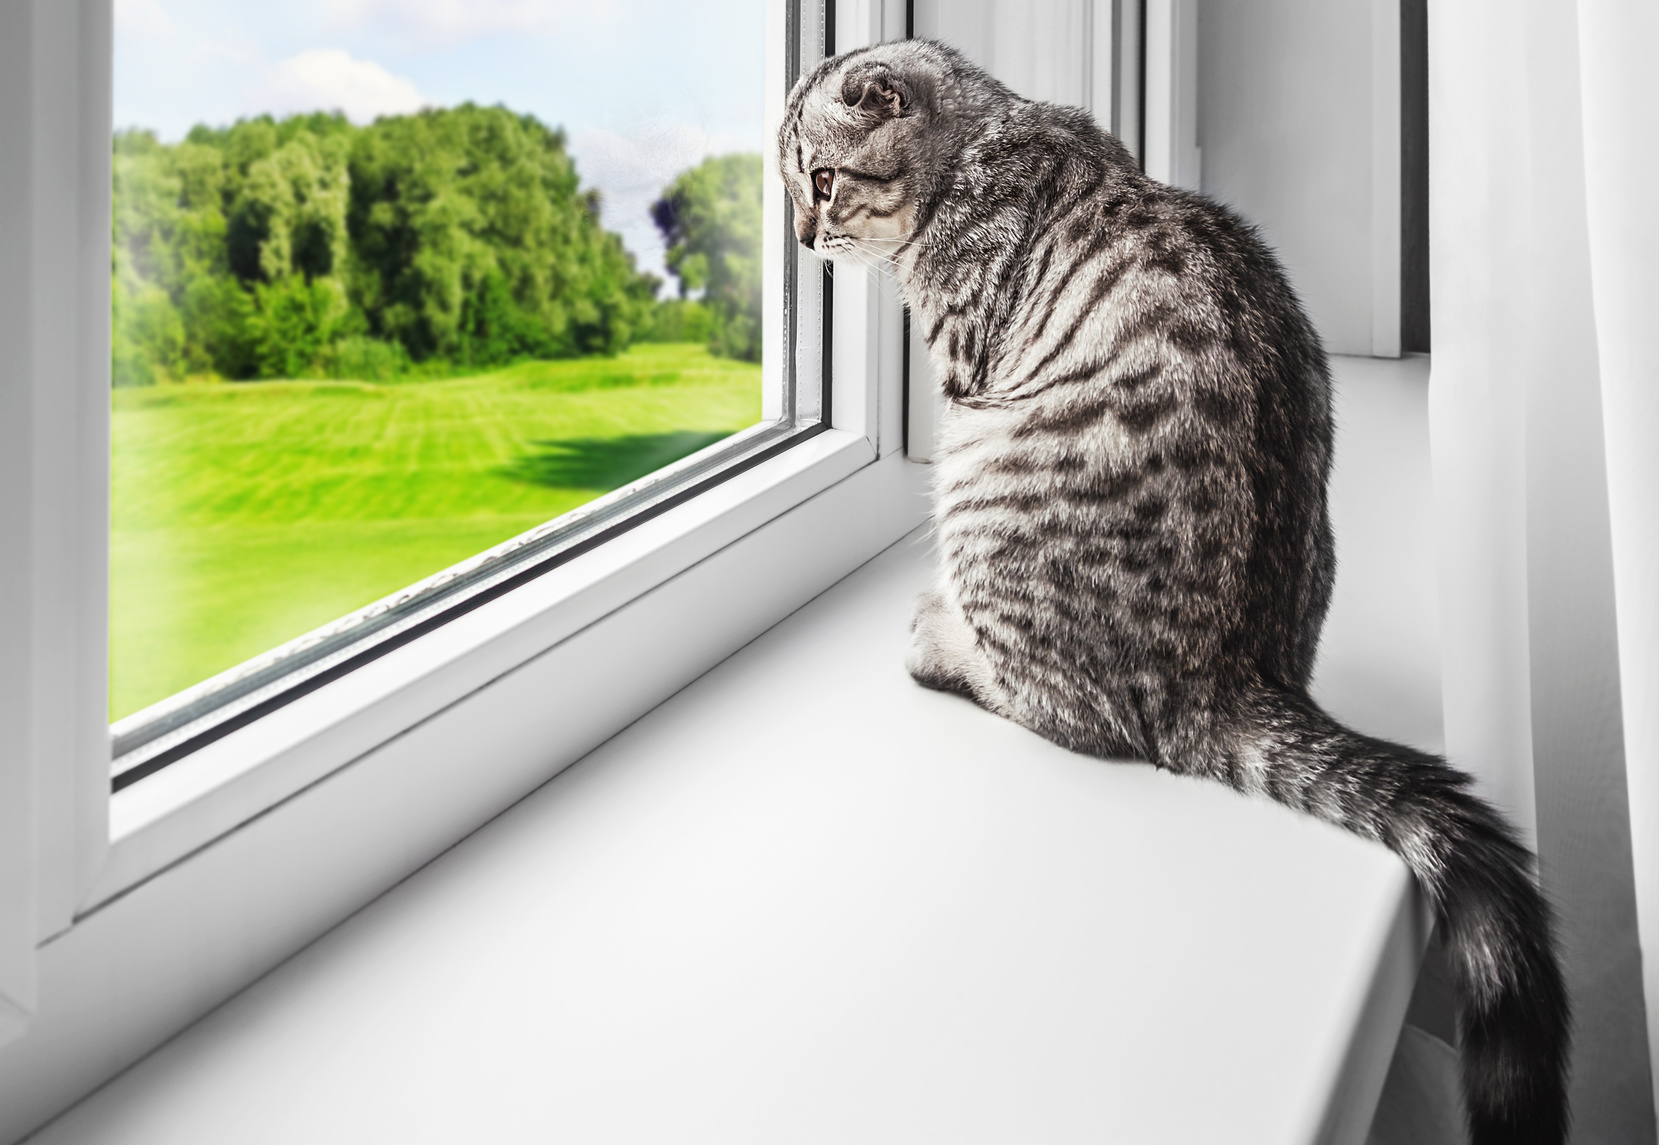 cat sits on a windowsill and looking out the window